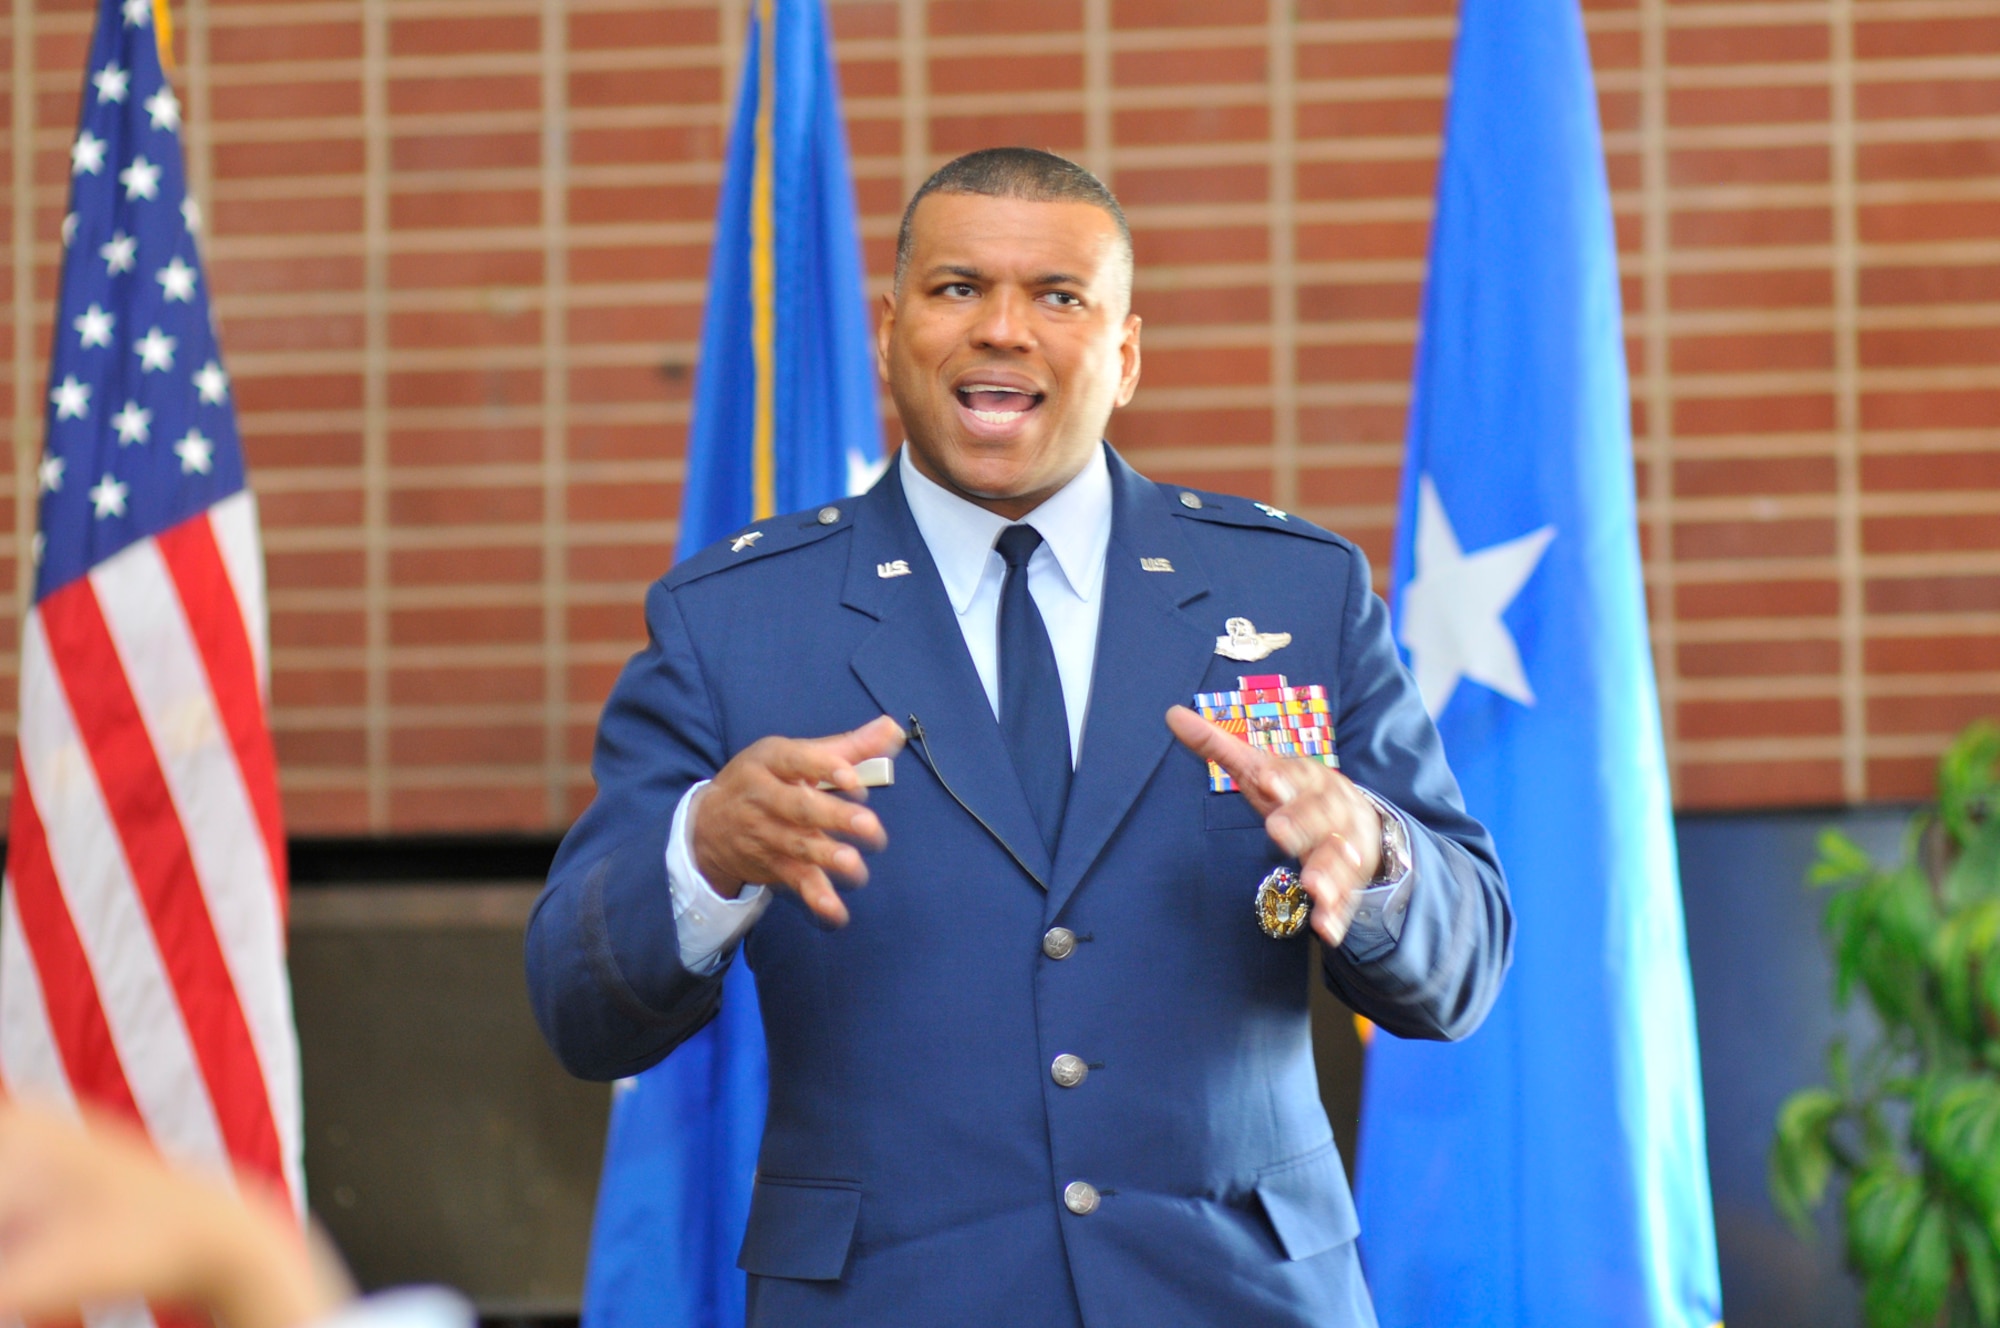 Brig. Gen. Richard M. Clark, Commandant of Cadets at the U.S. Air Force Academy in Colorado Springs, was the guest speaker at AEDC’s African-American Heritage Luncheon Feb. 8. (Photo by Rick Goodfriend)